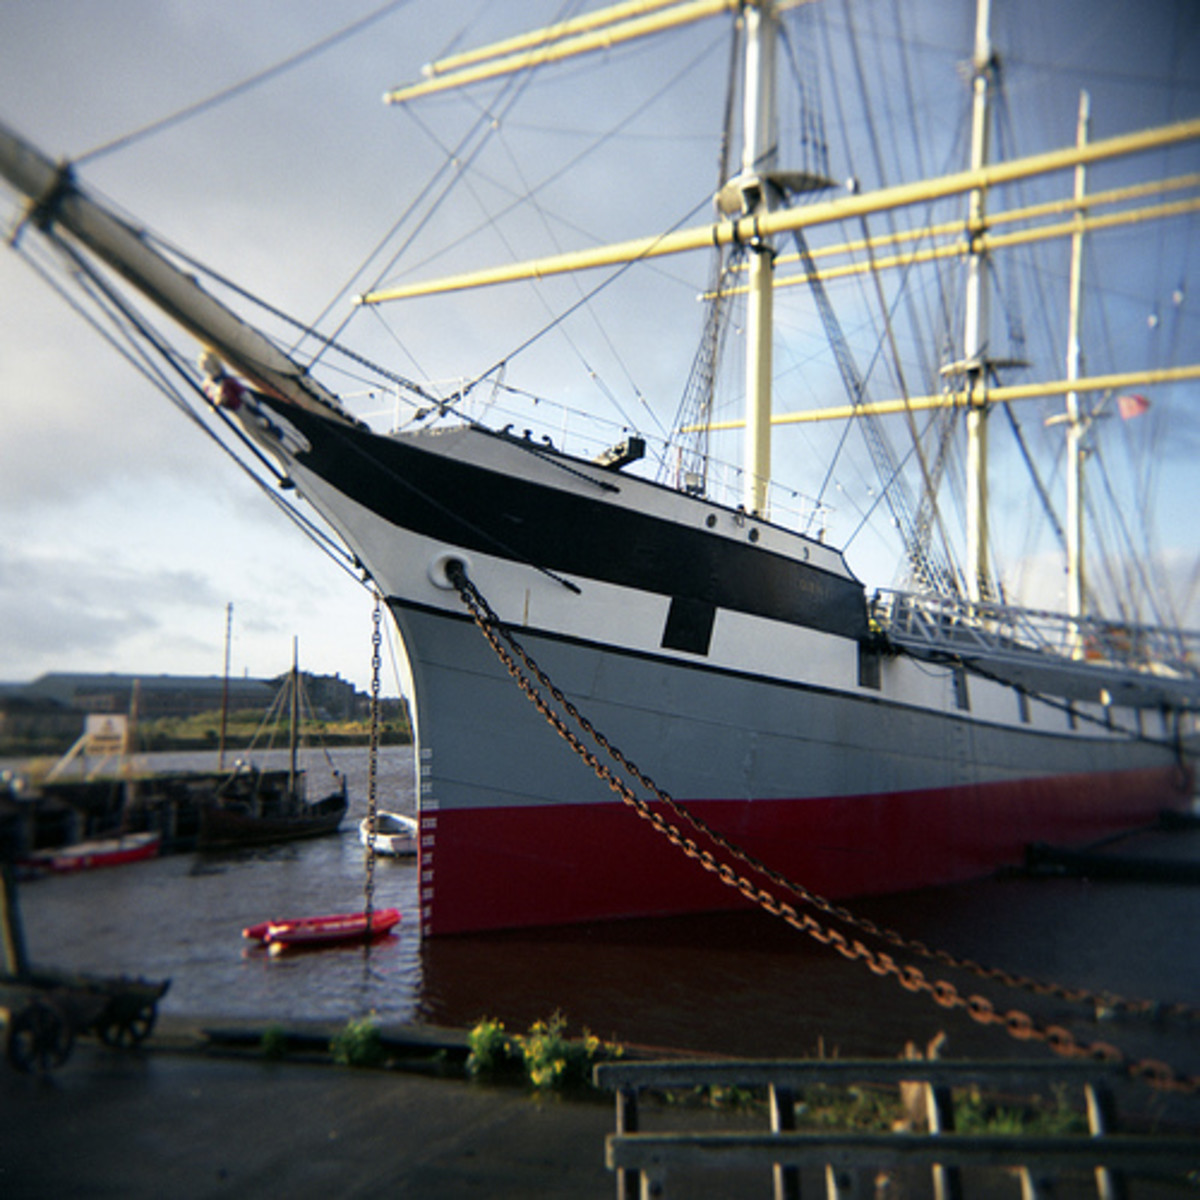 The History of Clyde Shipbuilding 3 : The 19th Century Atlantic Race and American Competition